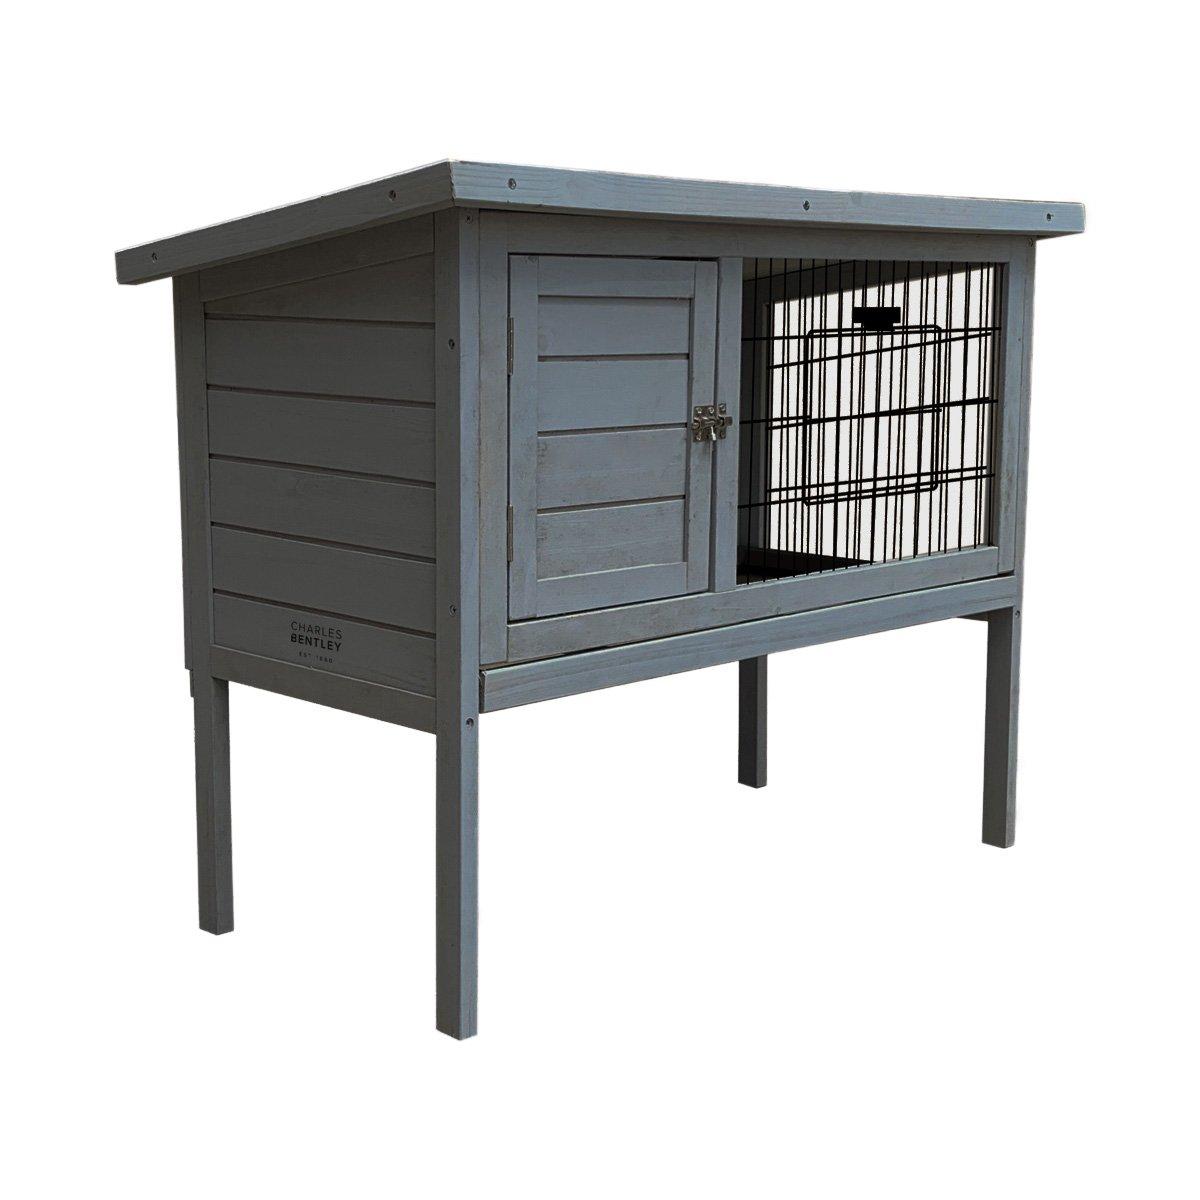 Wooden Pet Hutch Guinea Pig Cage Run w/ Cleaning Tray Grey/Brown